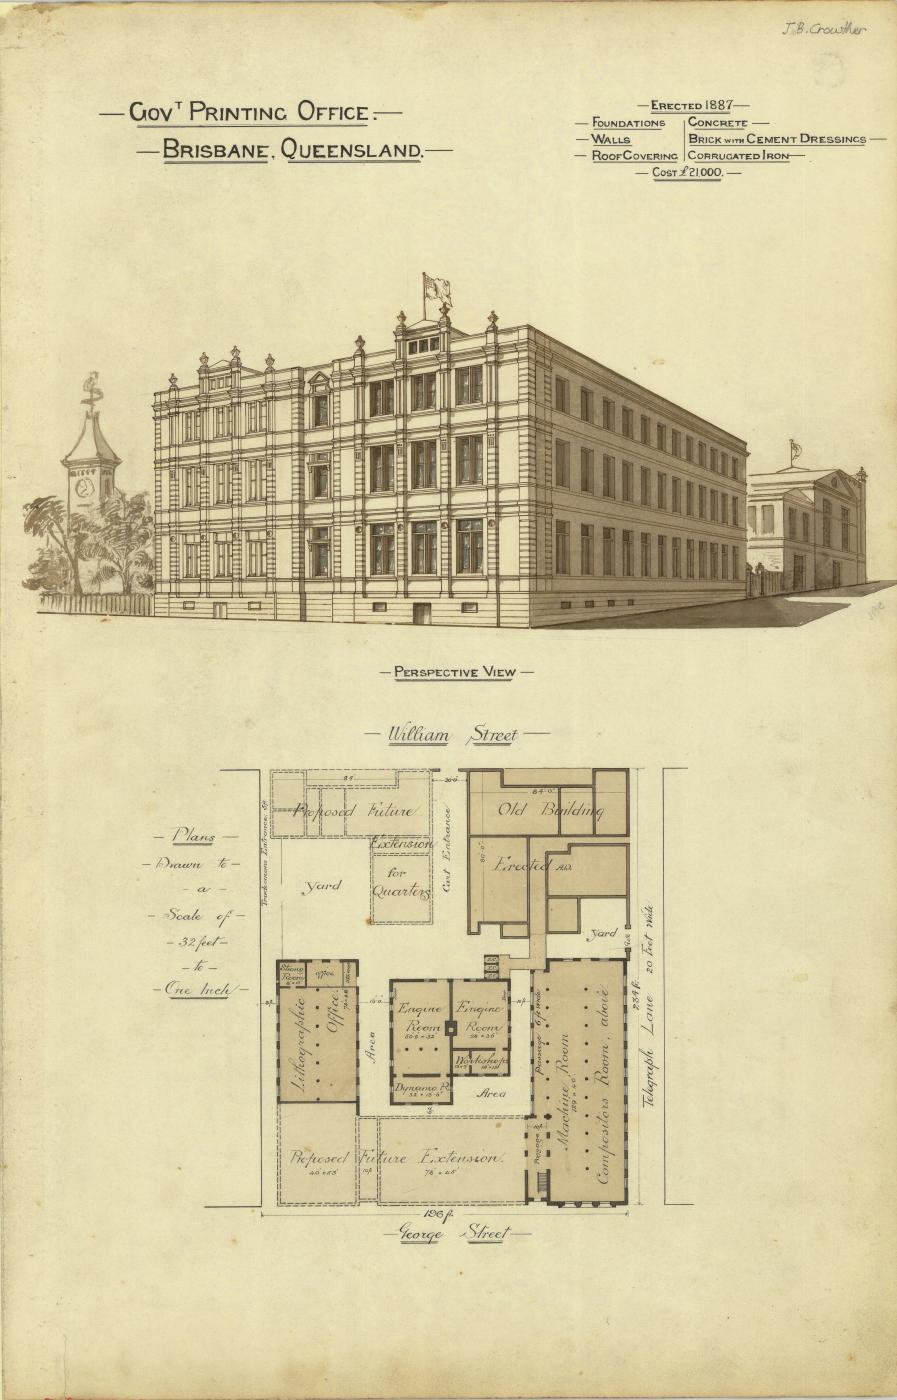 Architectural plan of the Government Printing Office, Brisbane